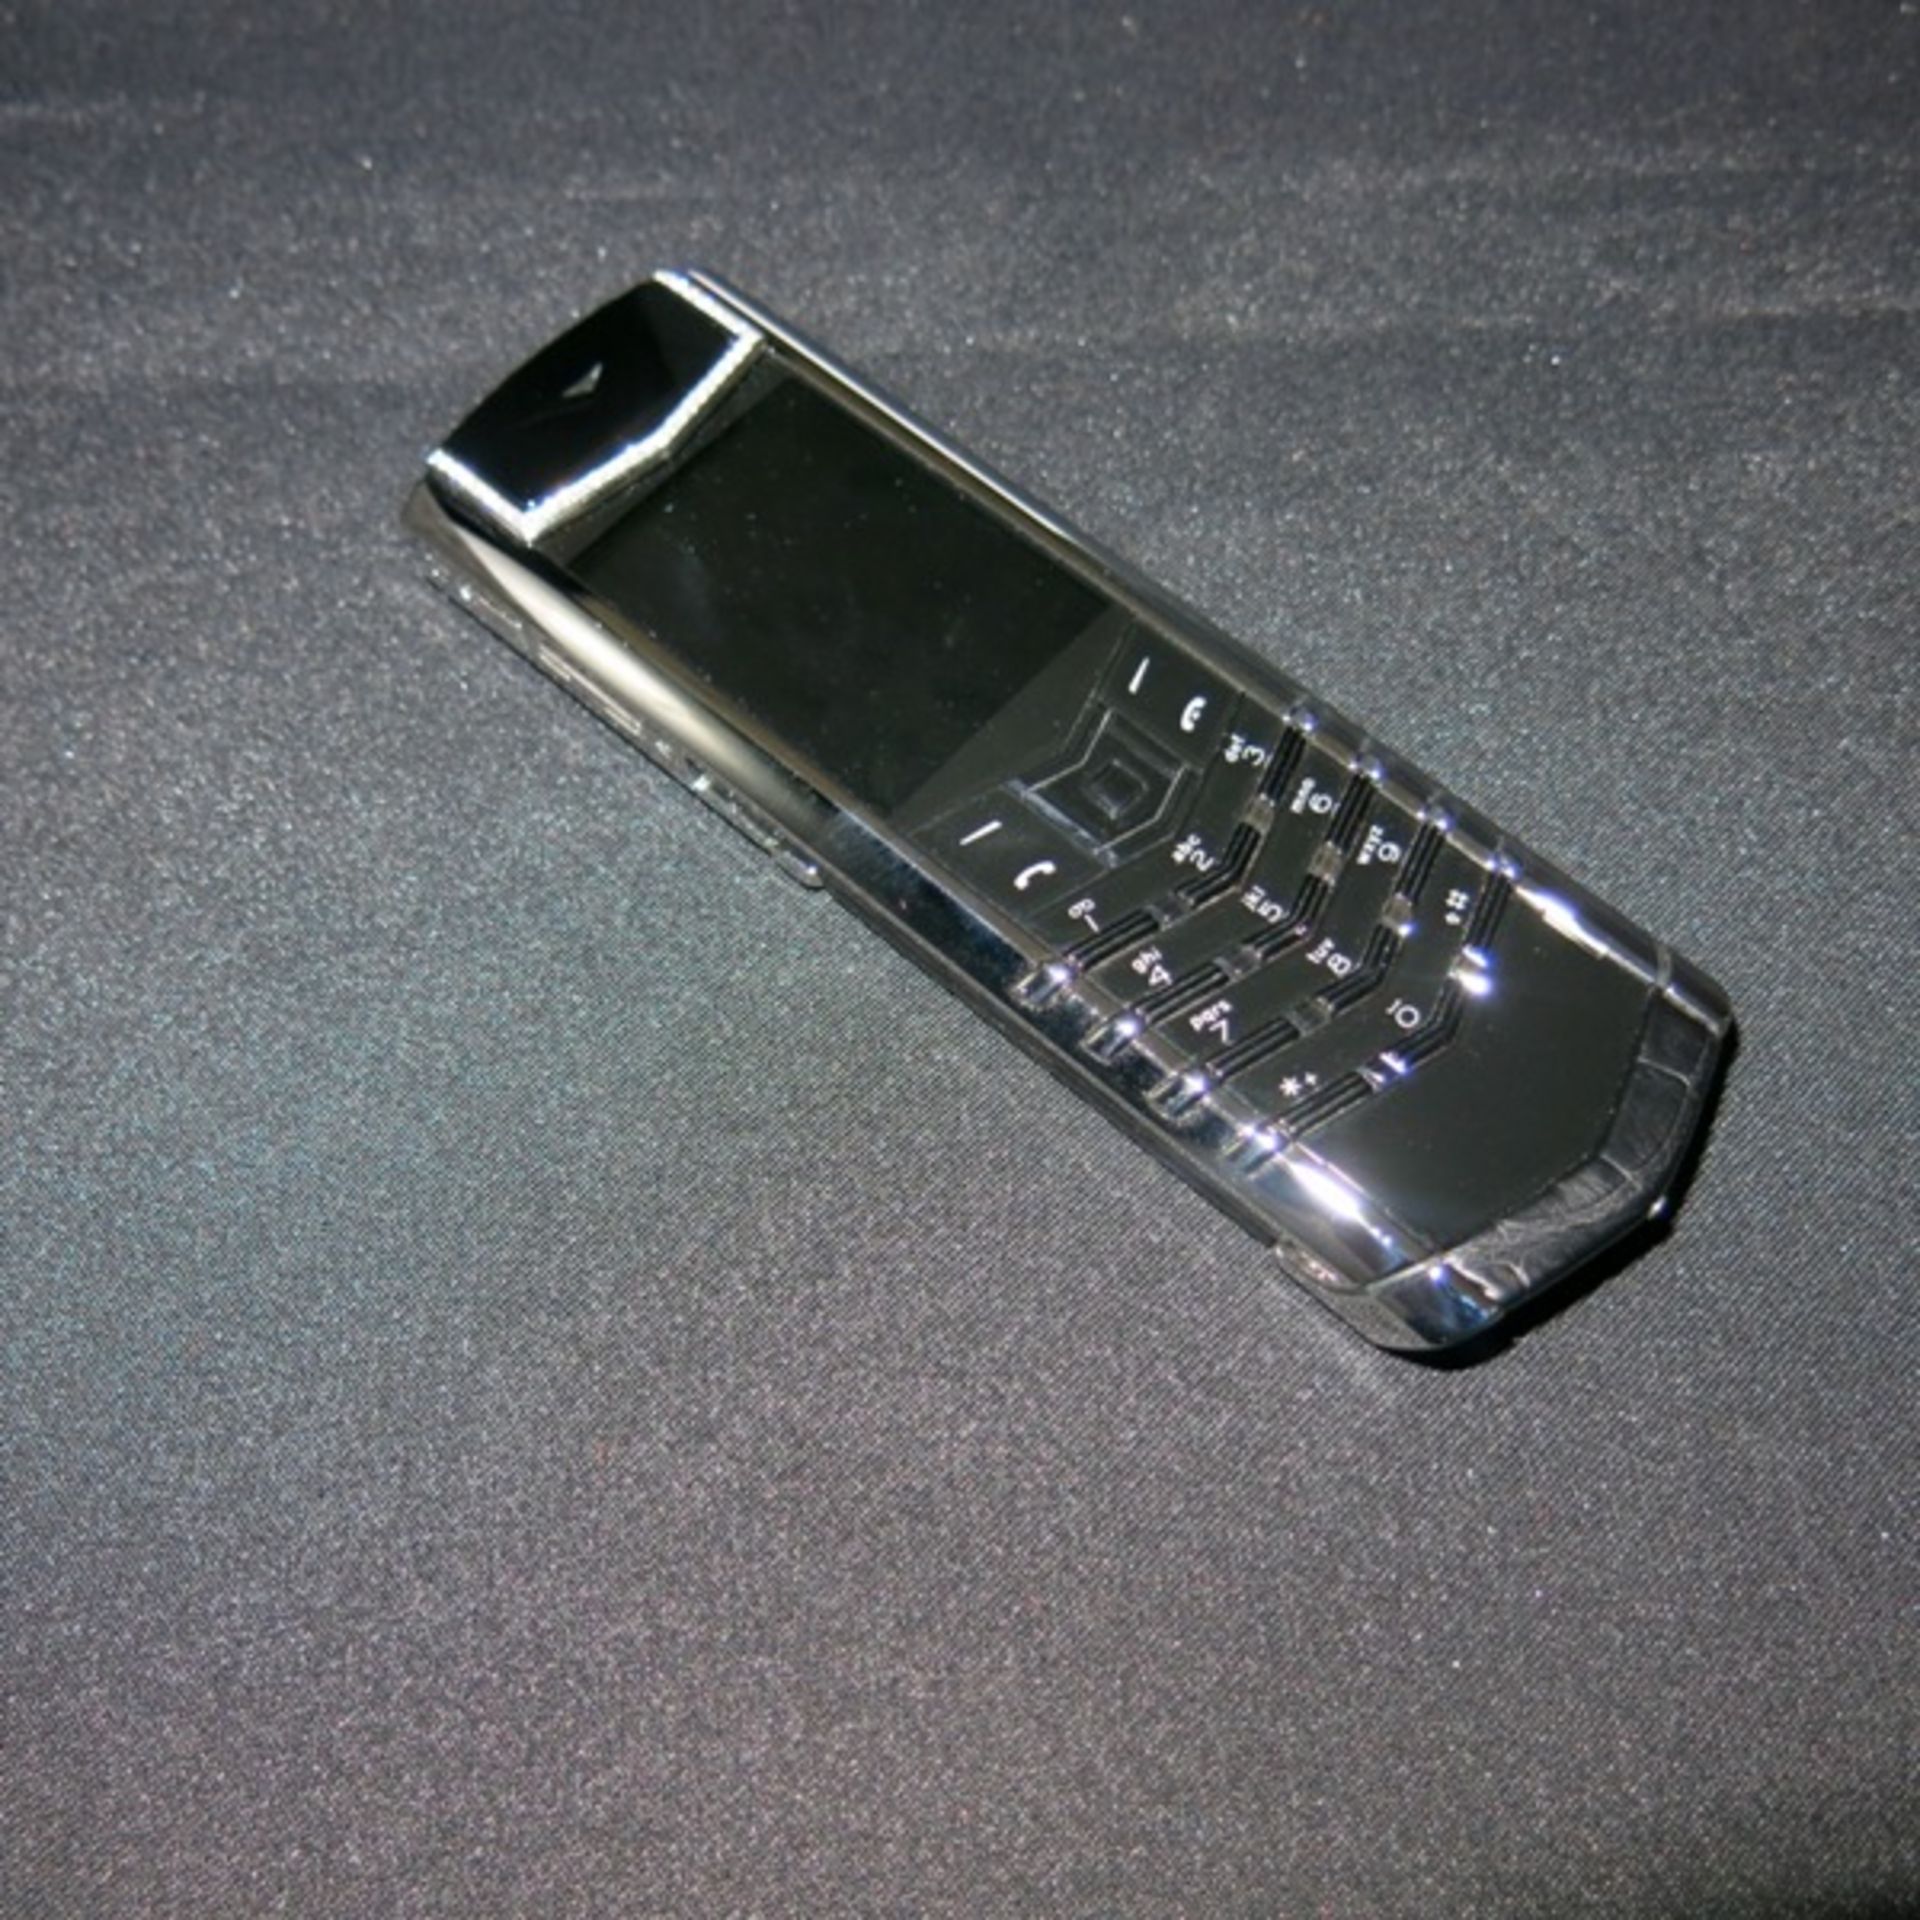 Vertu Signature S Phone with Diamond Pillow Frame & Polished Stainless. Furnished with Ceramic - Image 4 of 6